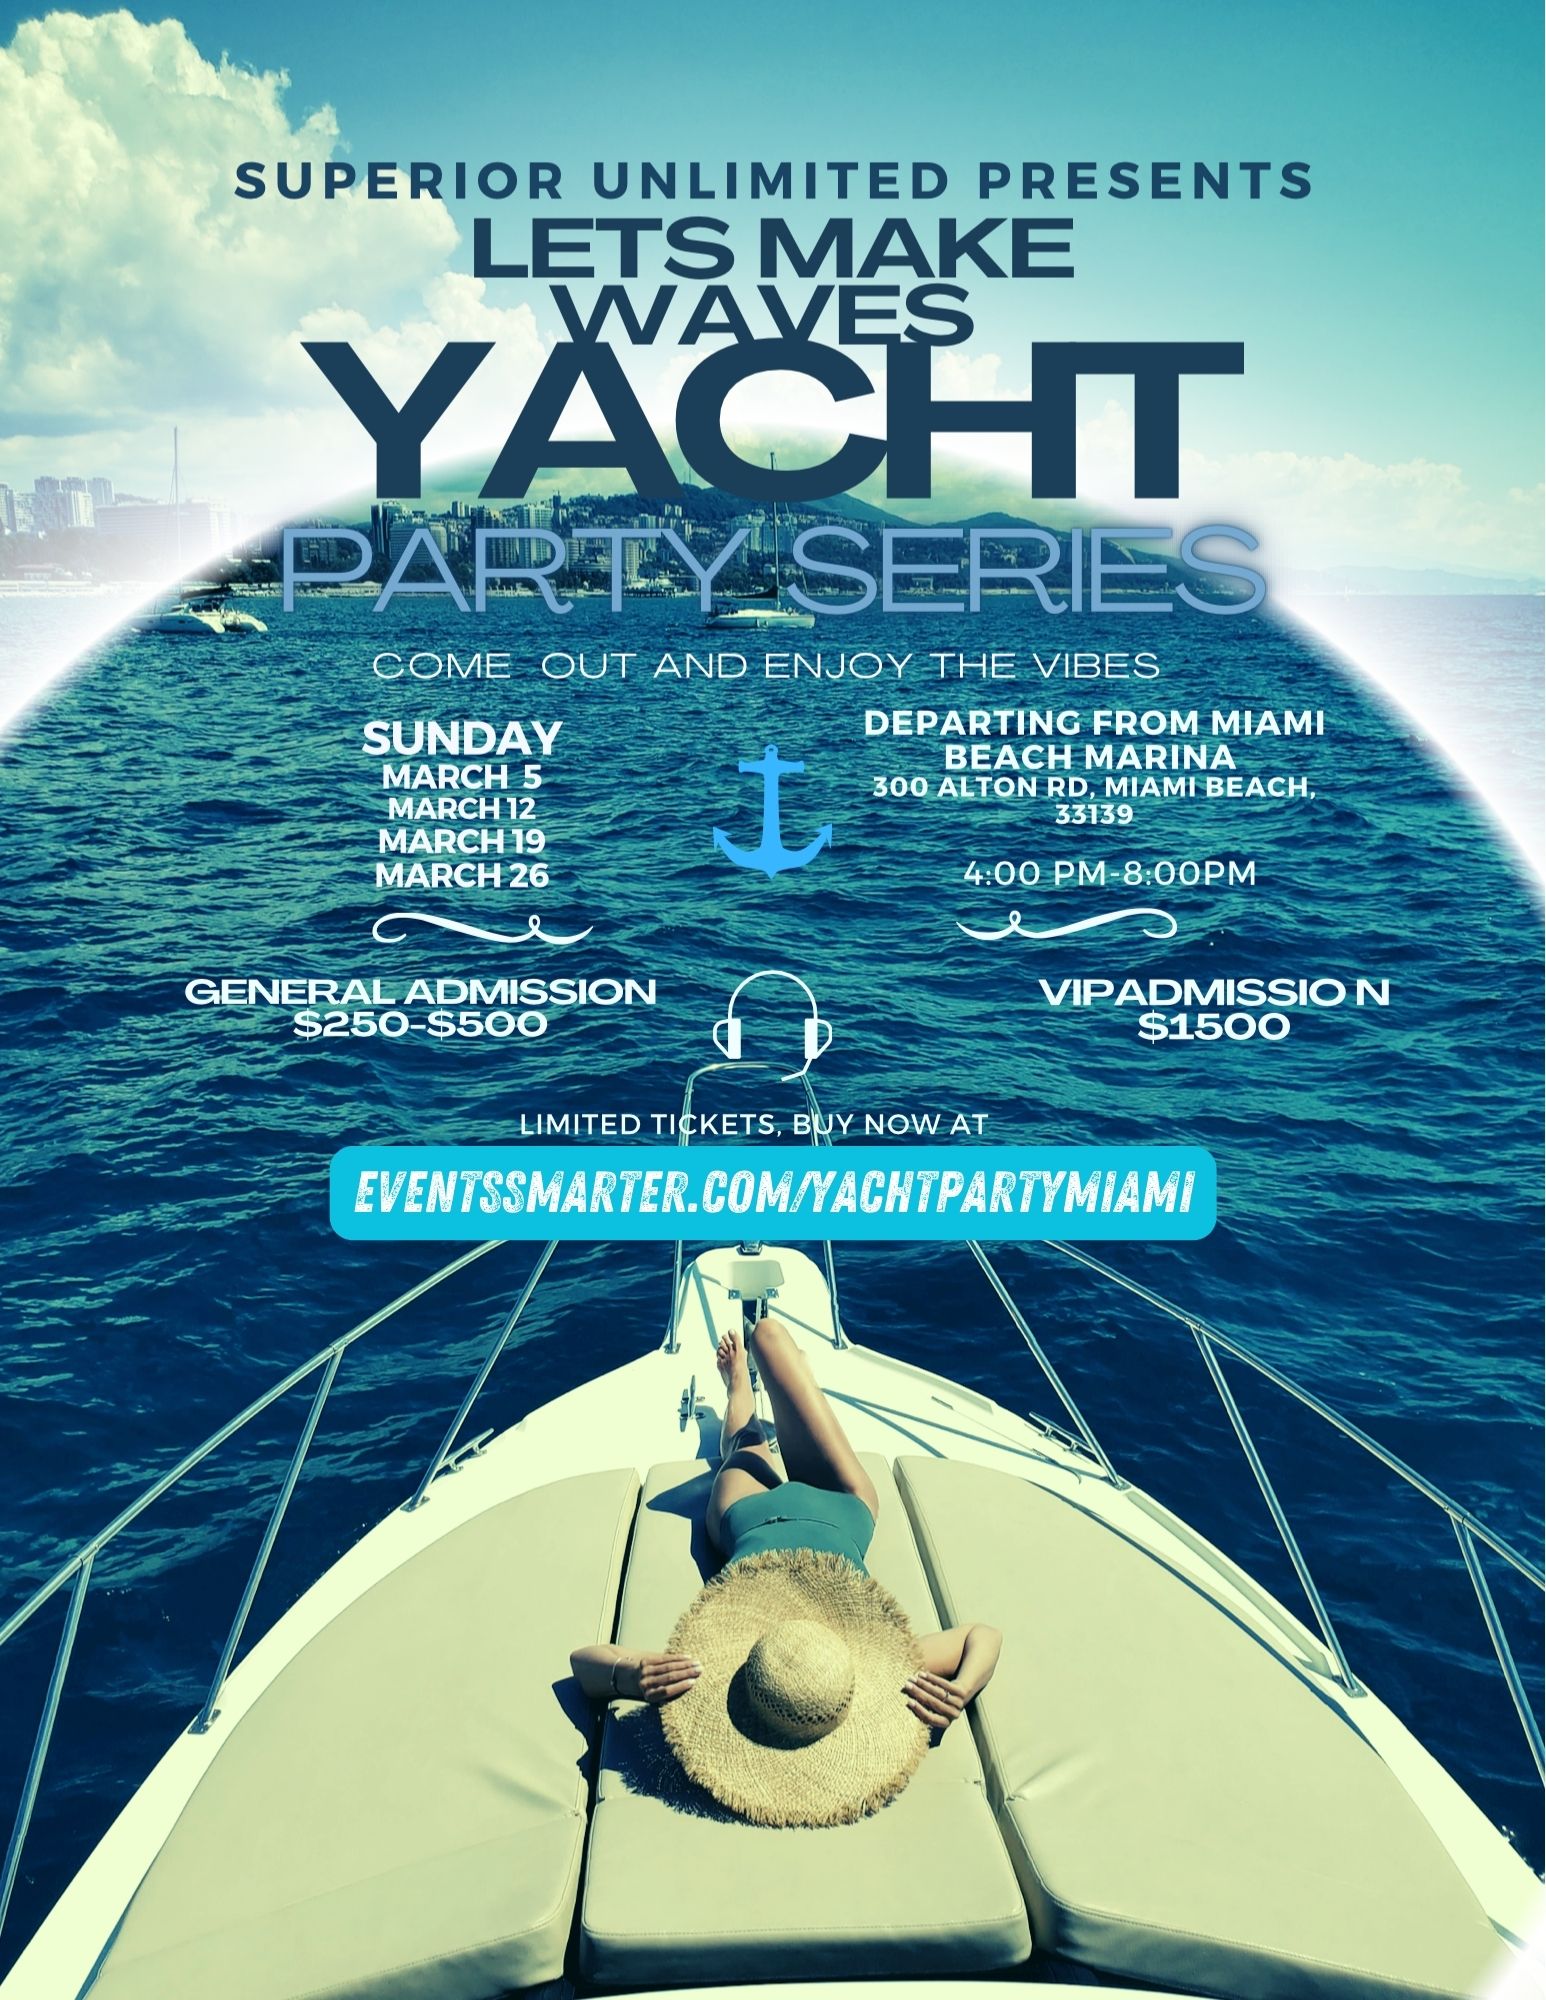 Yacht Party Series